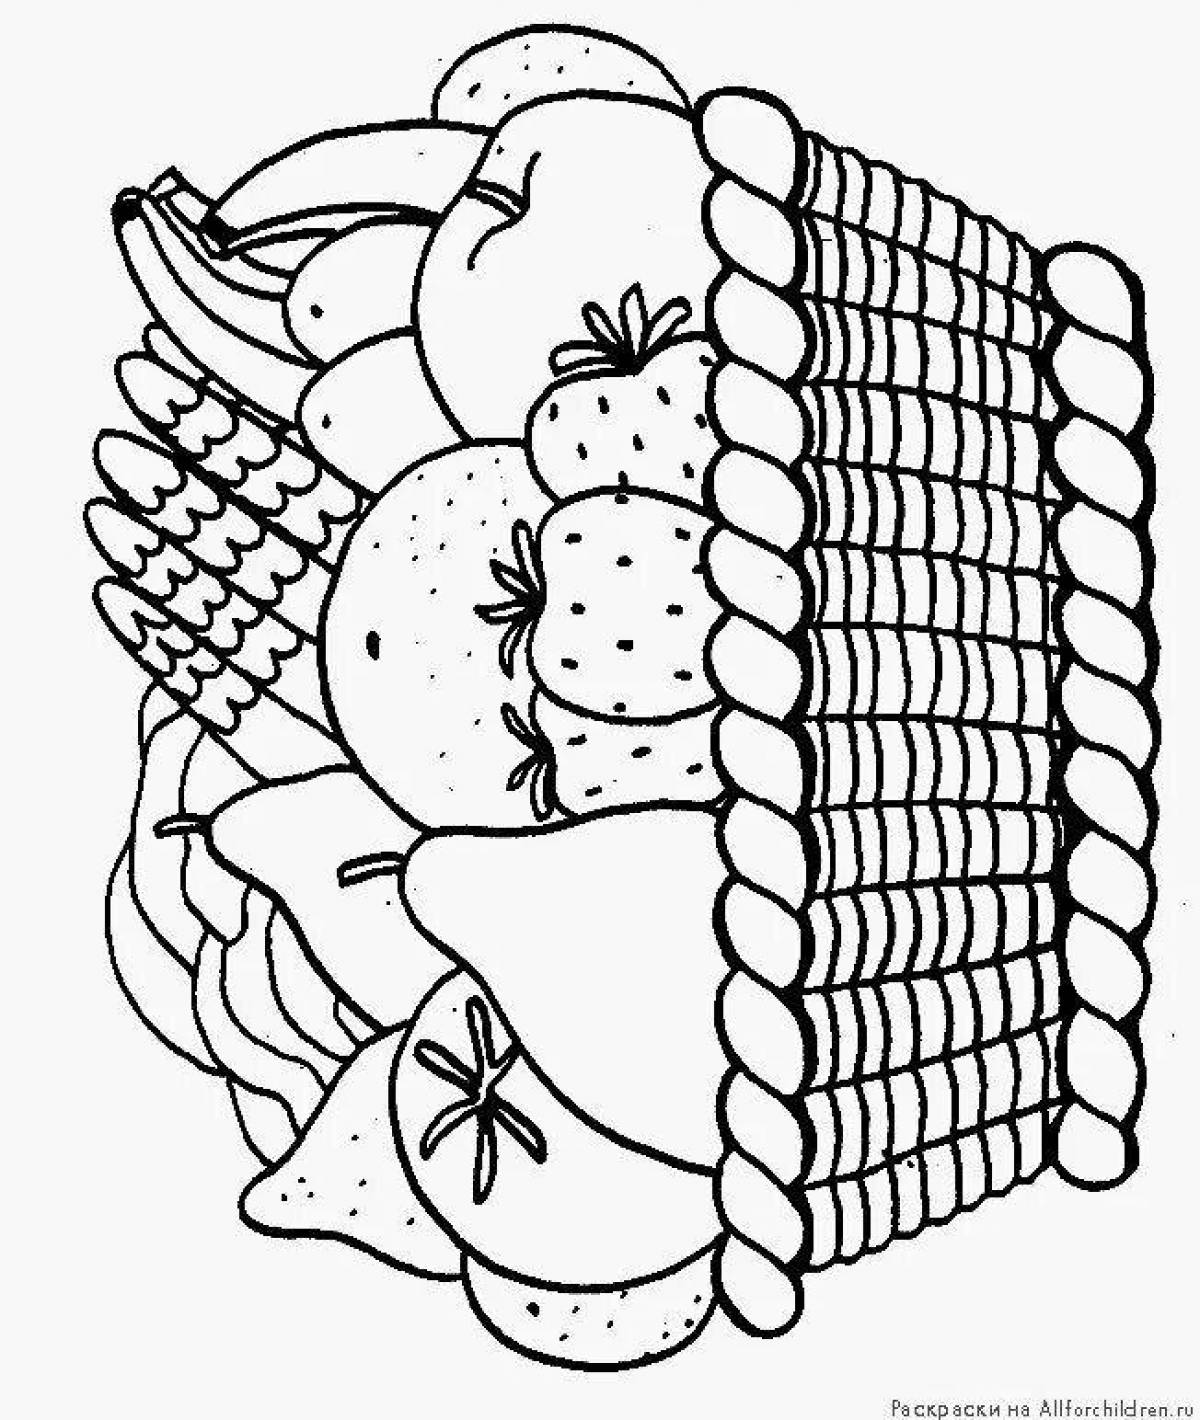 Joyful still life with fruits coloring book